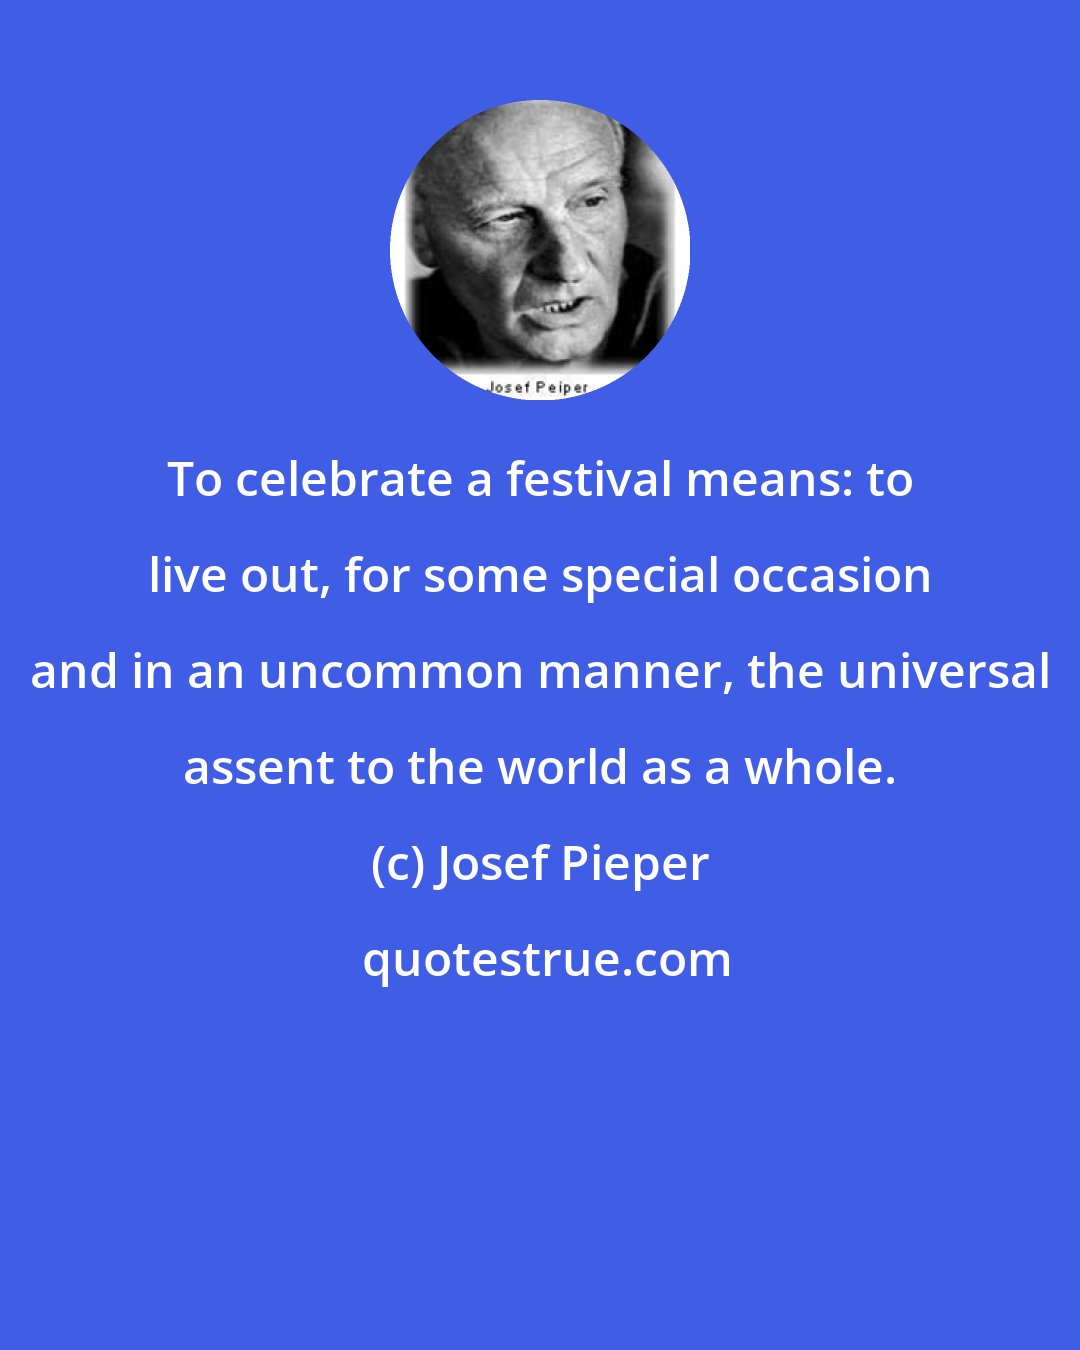 Josef Pieper: To celebrate a festival means: to live out, for some special occasion and in an uncommon manner, the universal assent to the world as a whole.